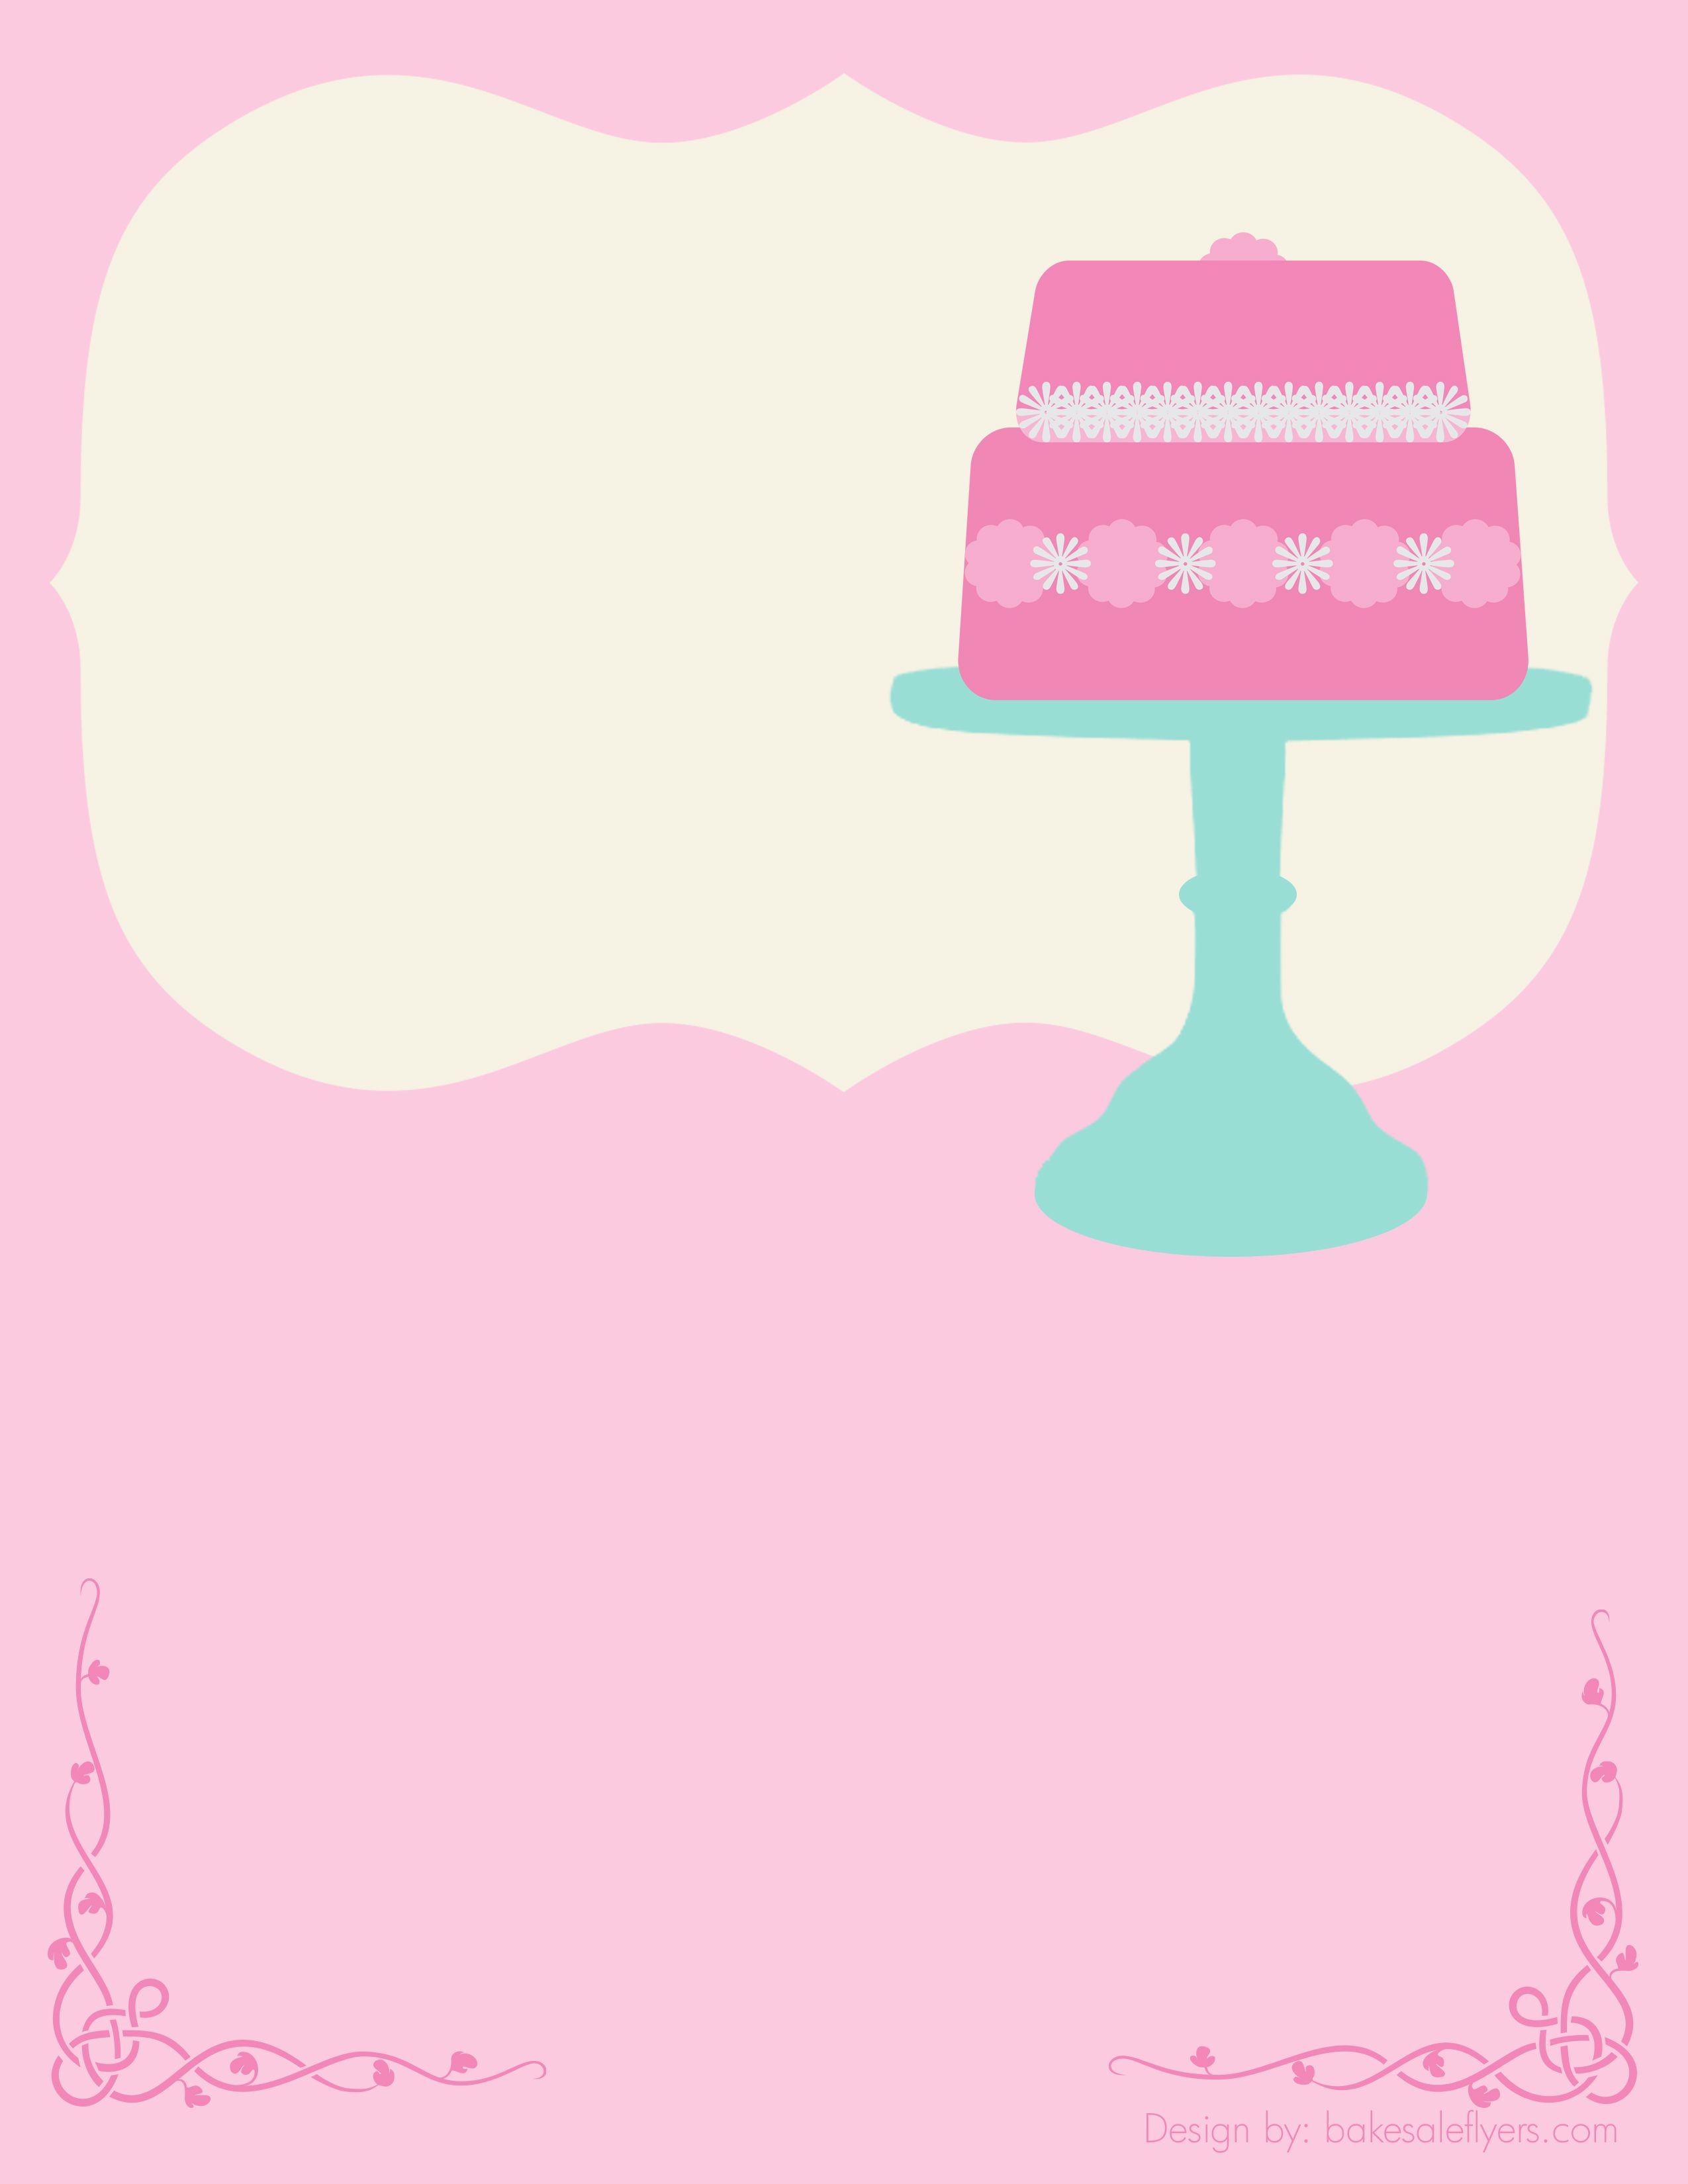 Free Bake Sale Flyer Template Cake Could TOTALLY See Customizing Label